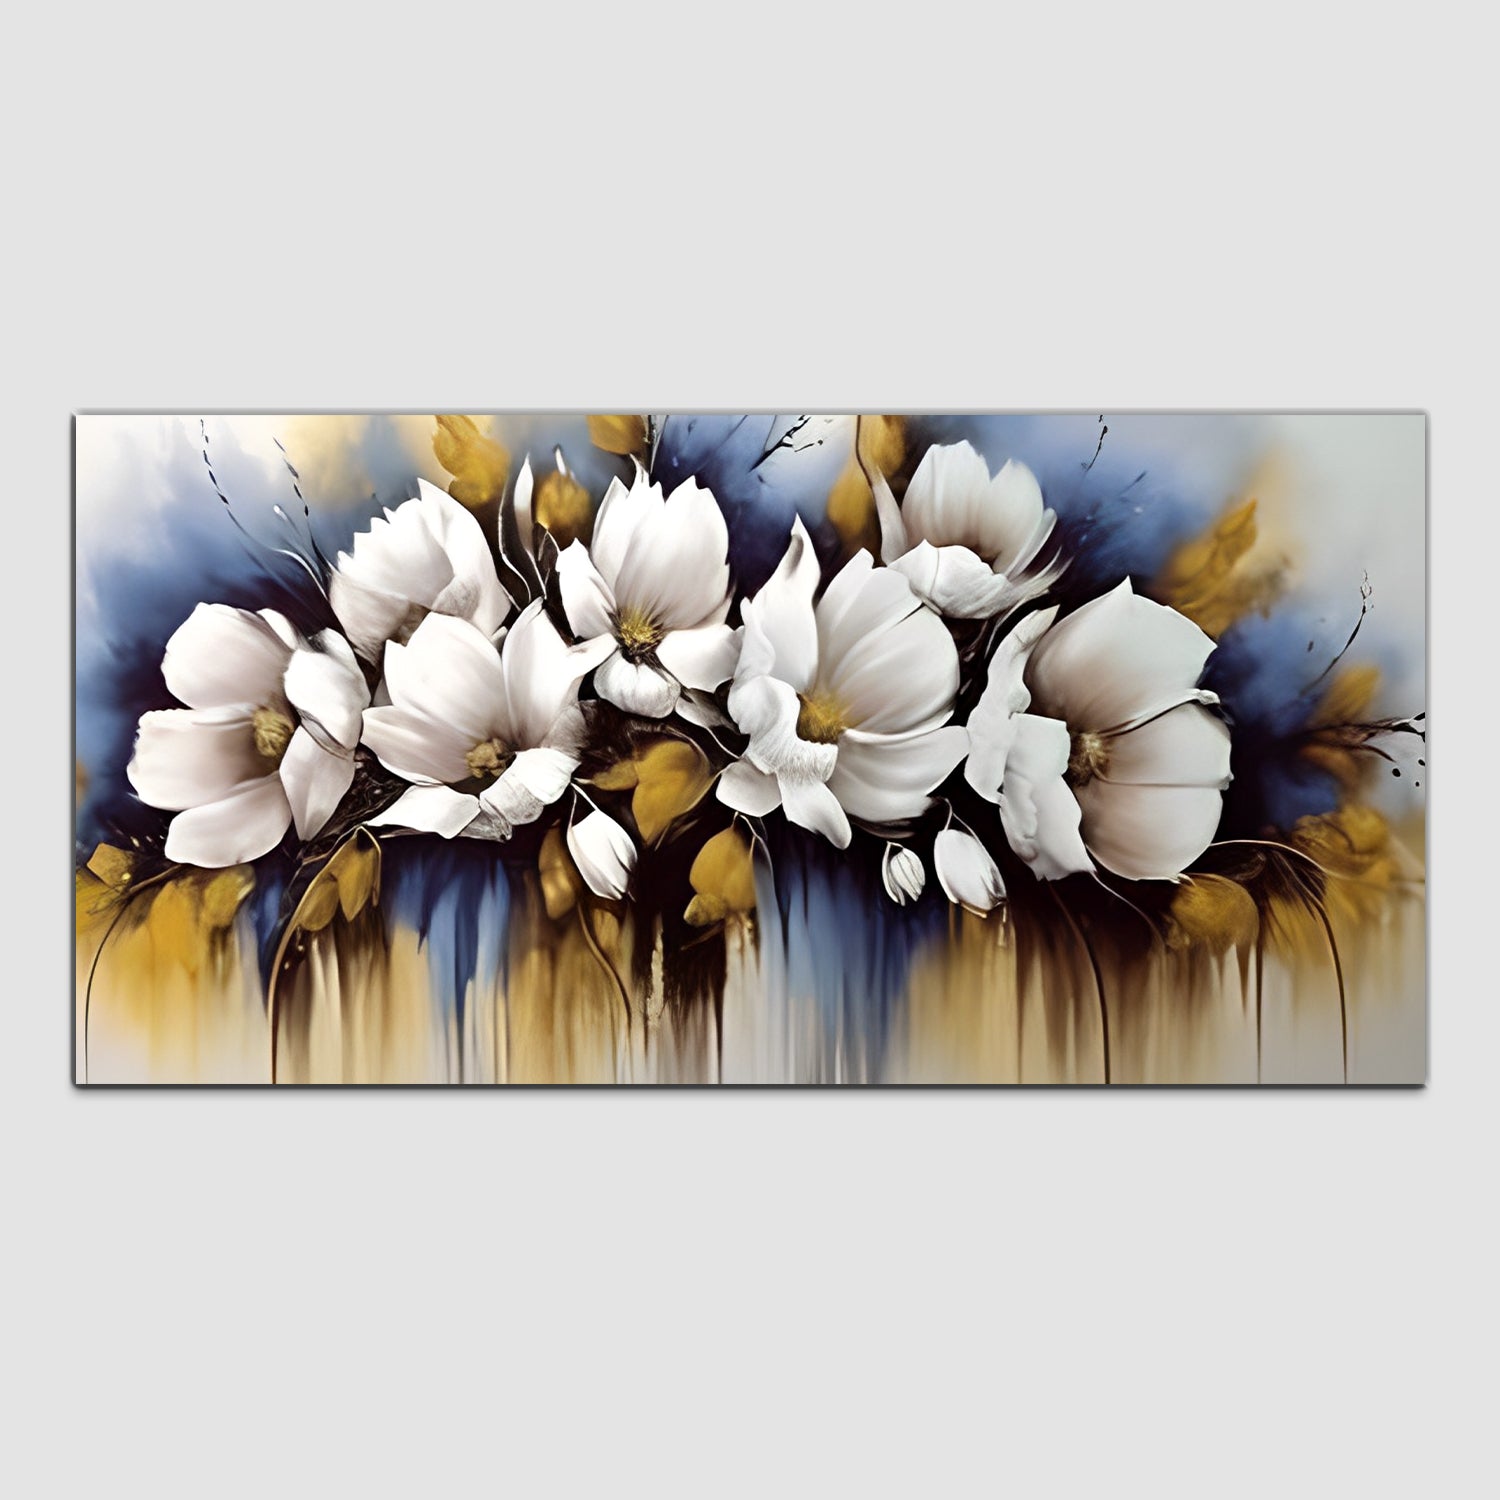 Flowers Gold-Off White Canvas Wall Painting